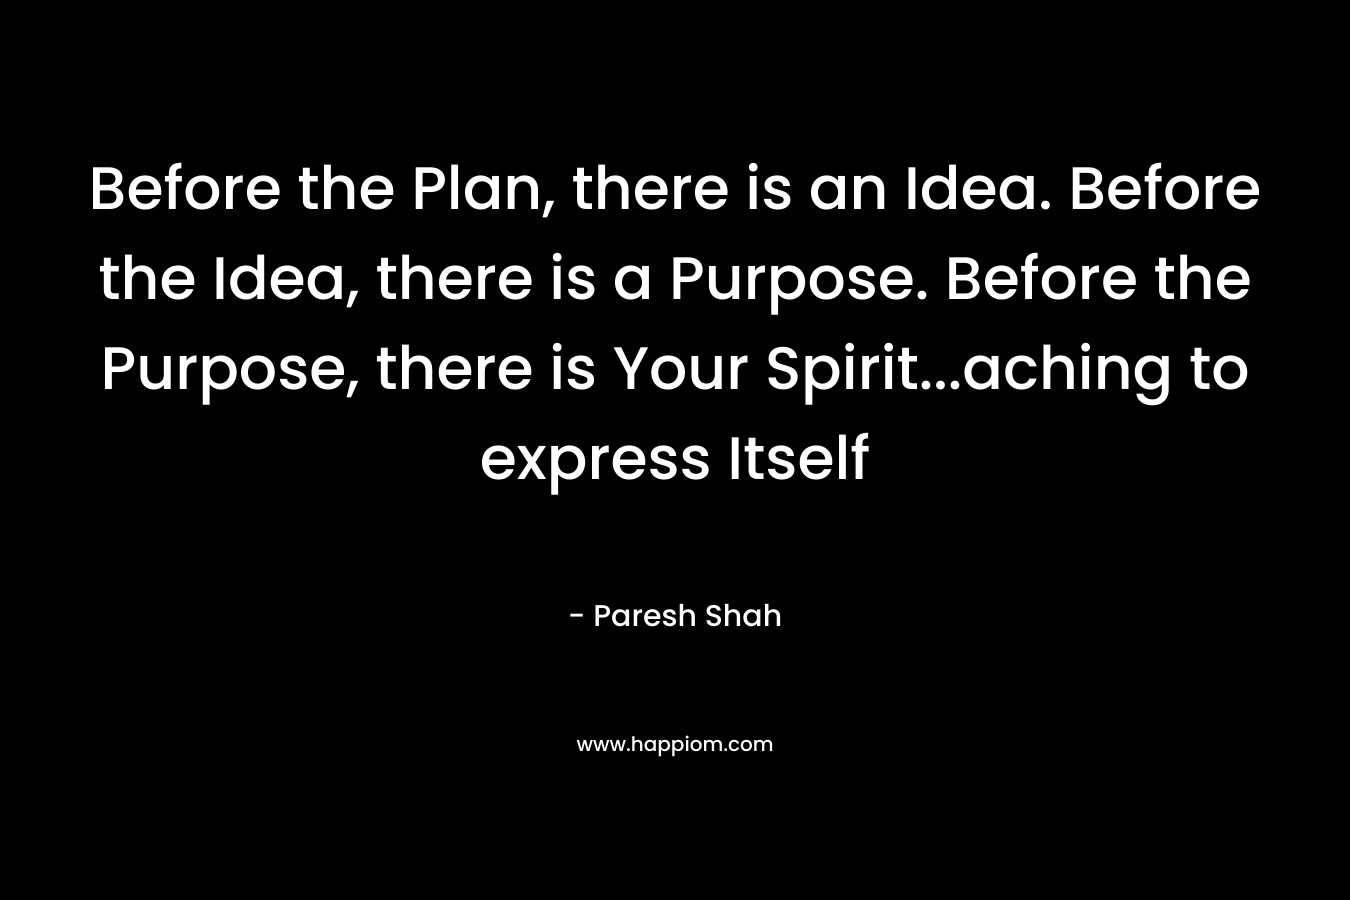 Before the Plan, there is an Idea. Before the Idea, there is a Purpose. Before the Purpose, there is Your Spirit...aching to express Itself